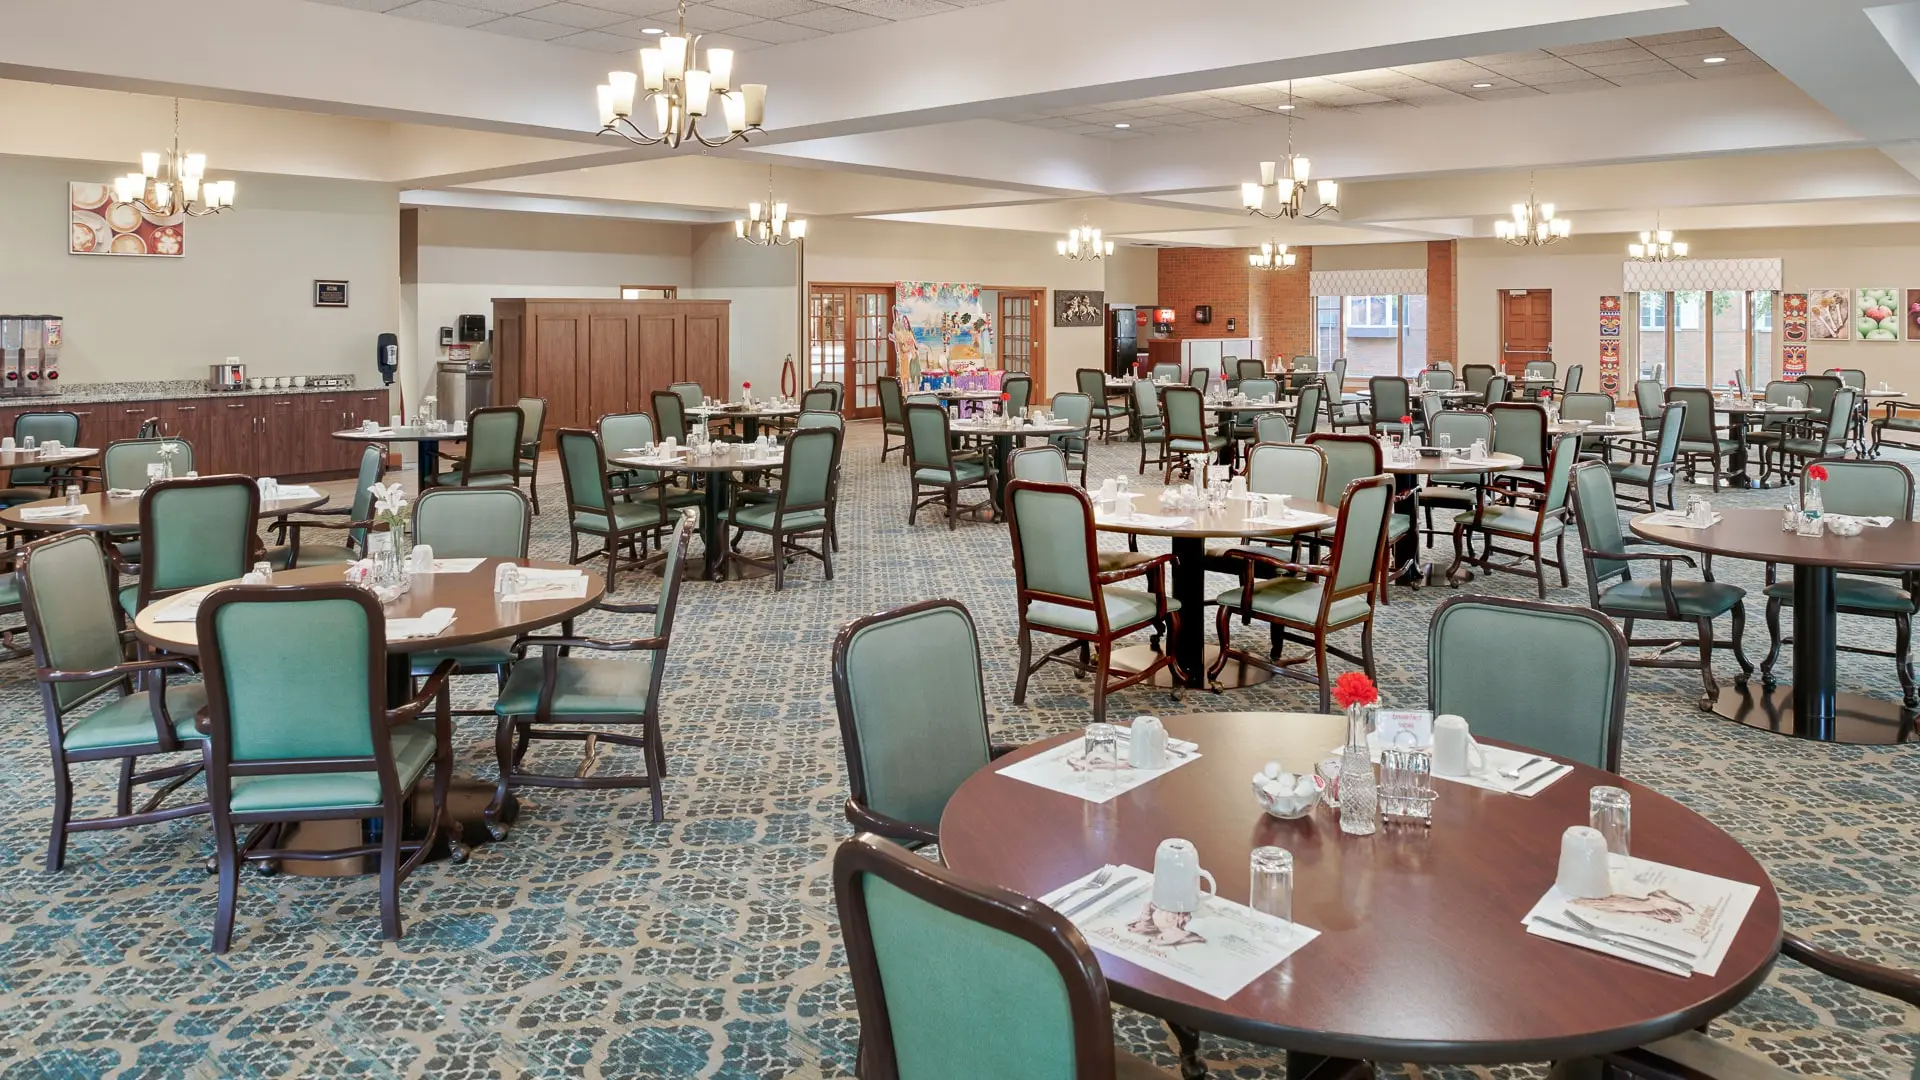 Large carpeted dining hall at American House East I, a senior living community in Roseville, Michigan